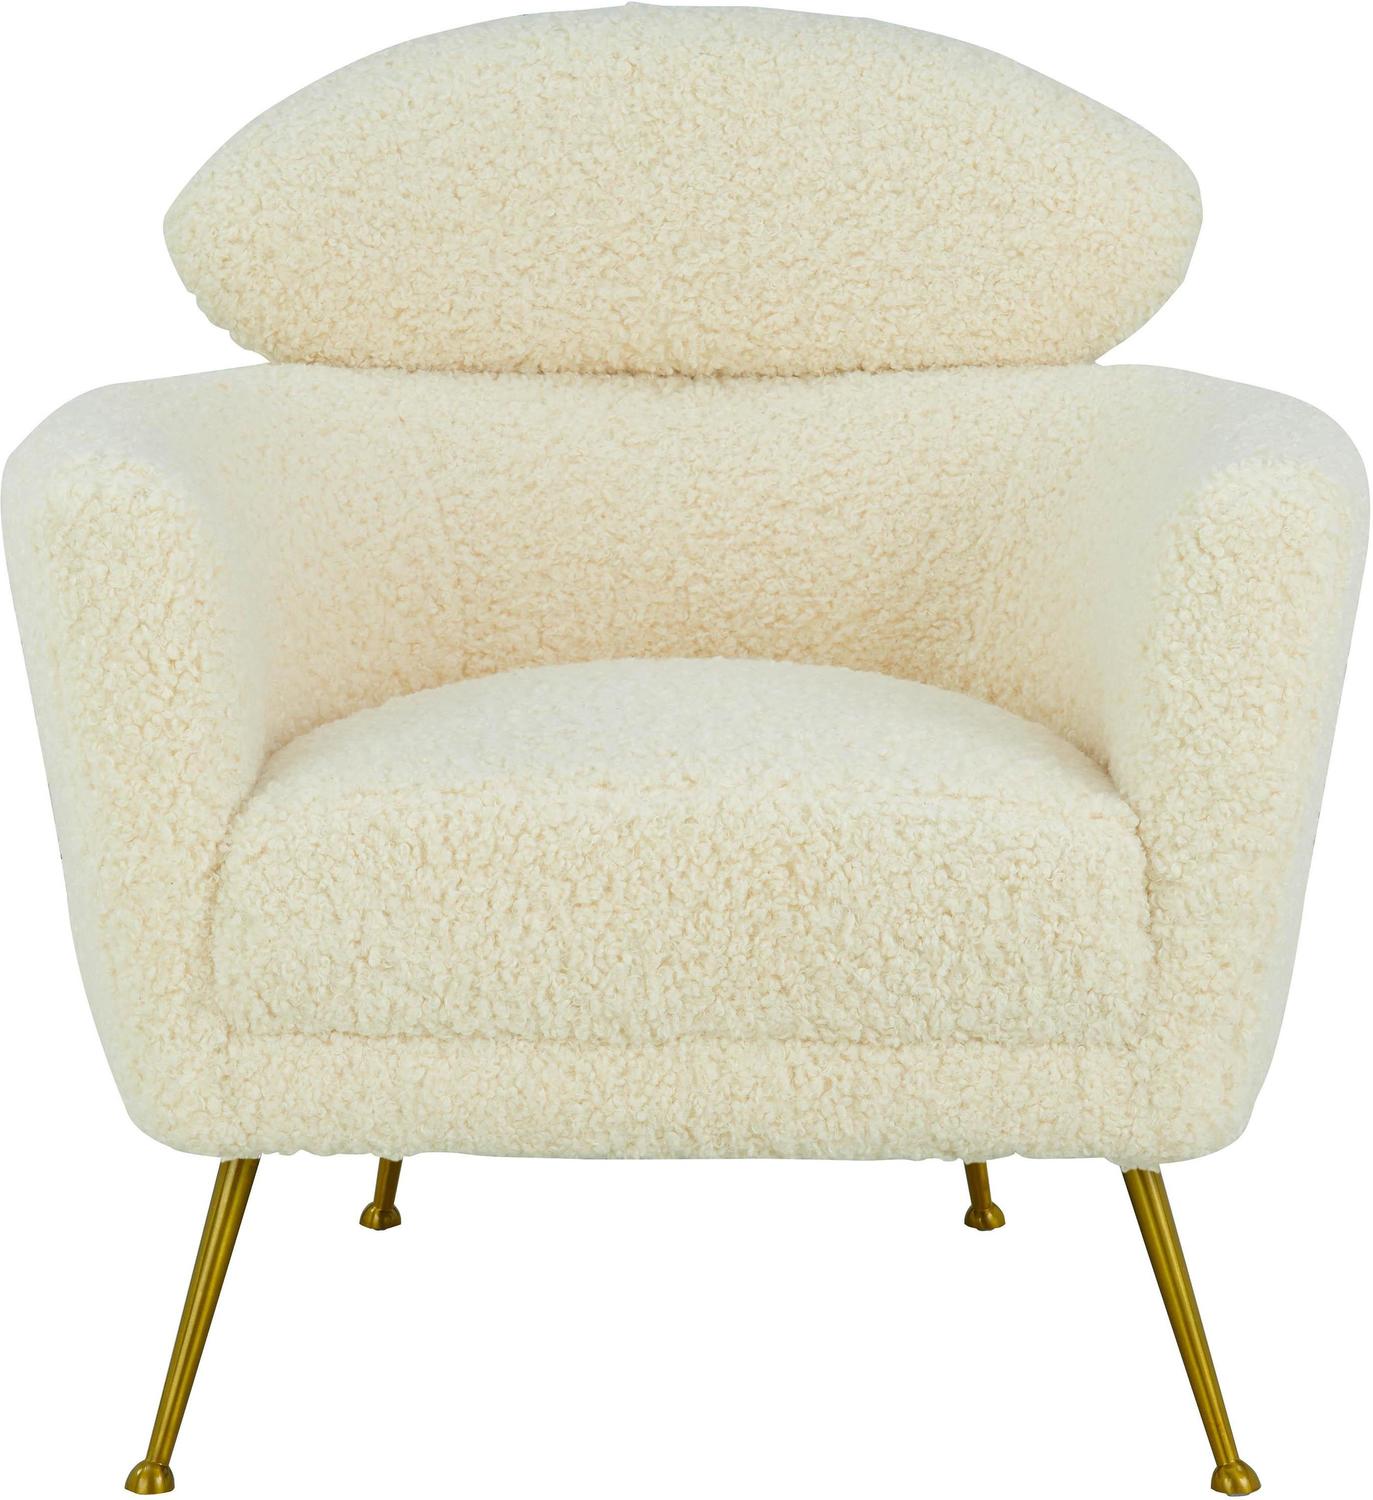 small accent chairs with arms Contemporary Design Furniture Accent Chairs Cream